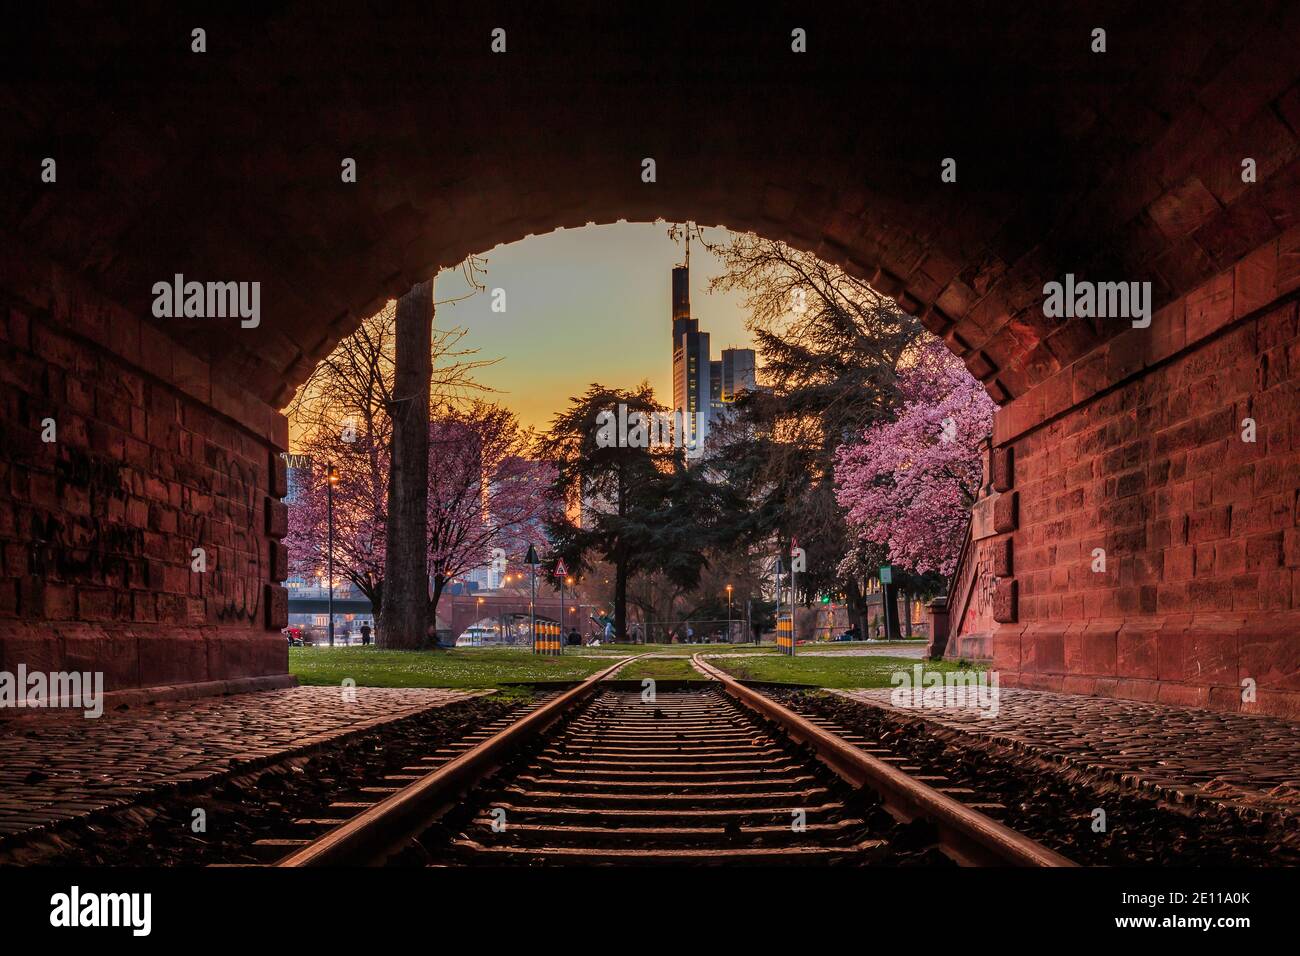 Tunnel in dark red bricks. Historic railway track in the park with trees with blossoms near the river Main in Frankfurt. Skyline of the financial dist Stock Photo